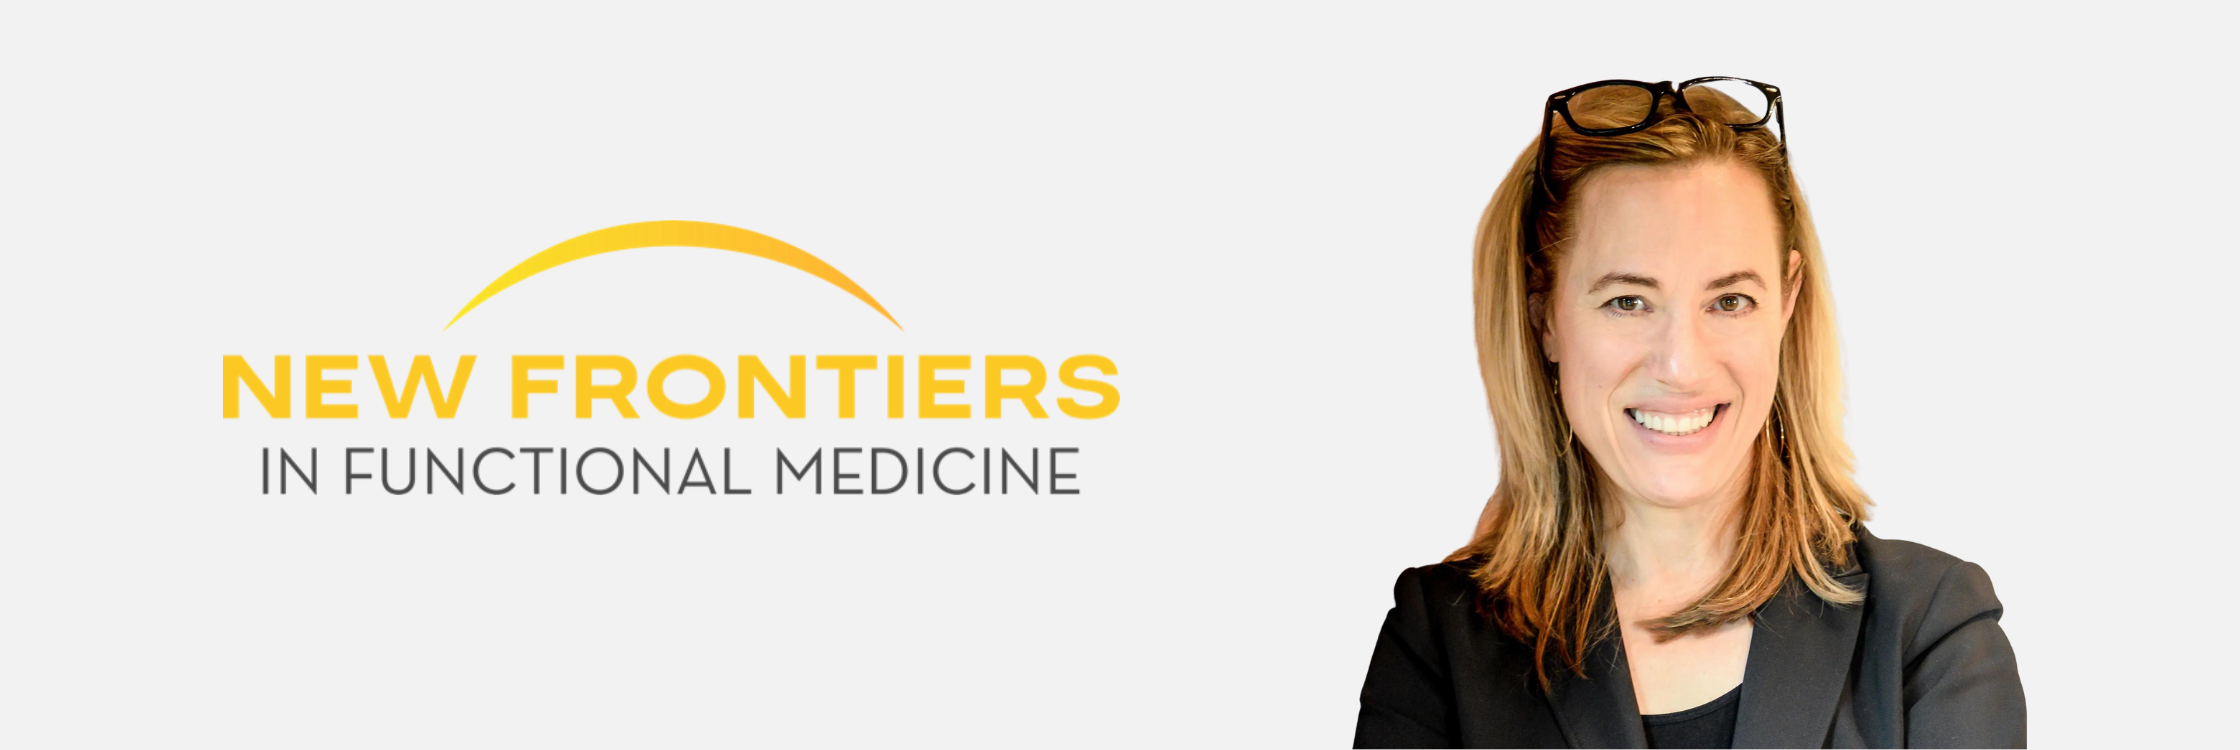 A women next to New Frontiers logo